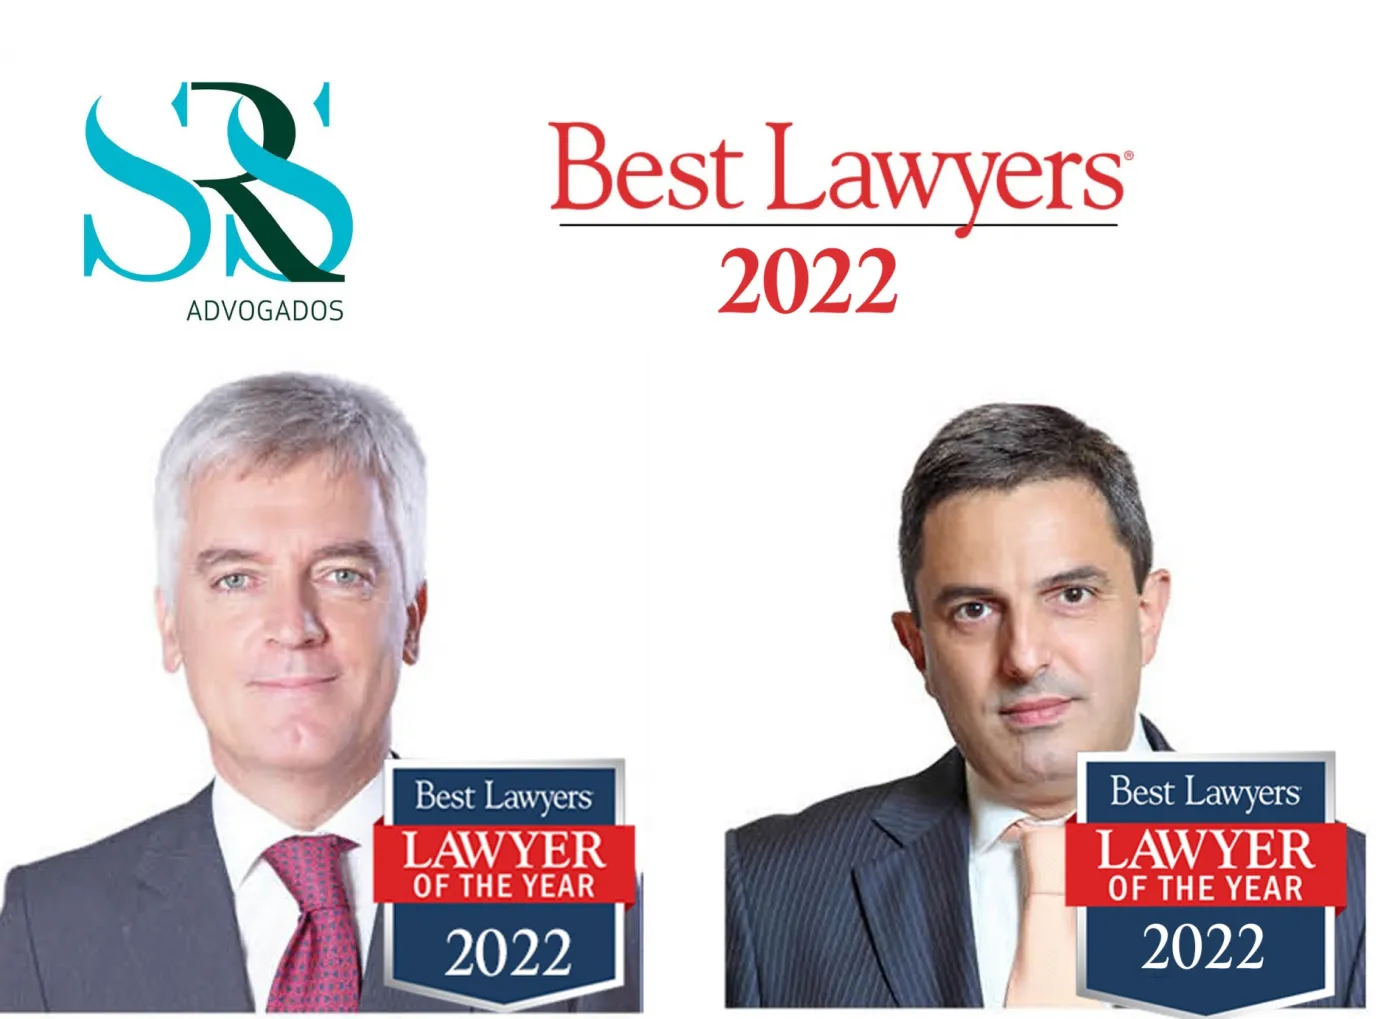 Octávio Castelo Paulo and Luís Neto Galvão named "Lawyer of the Year" by Best Lawyers 2022